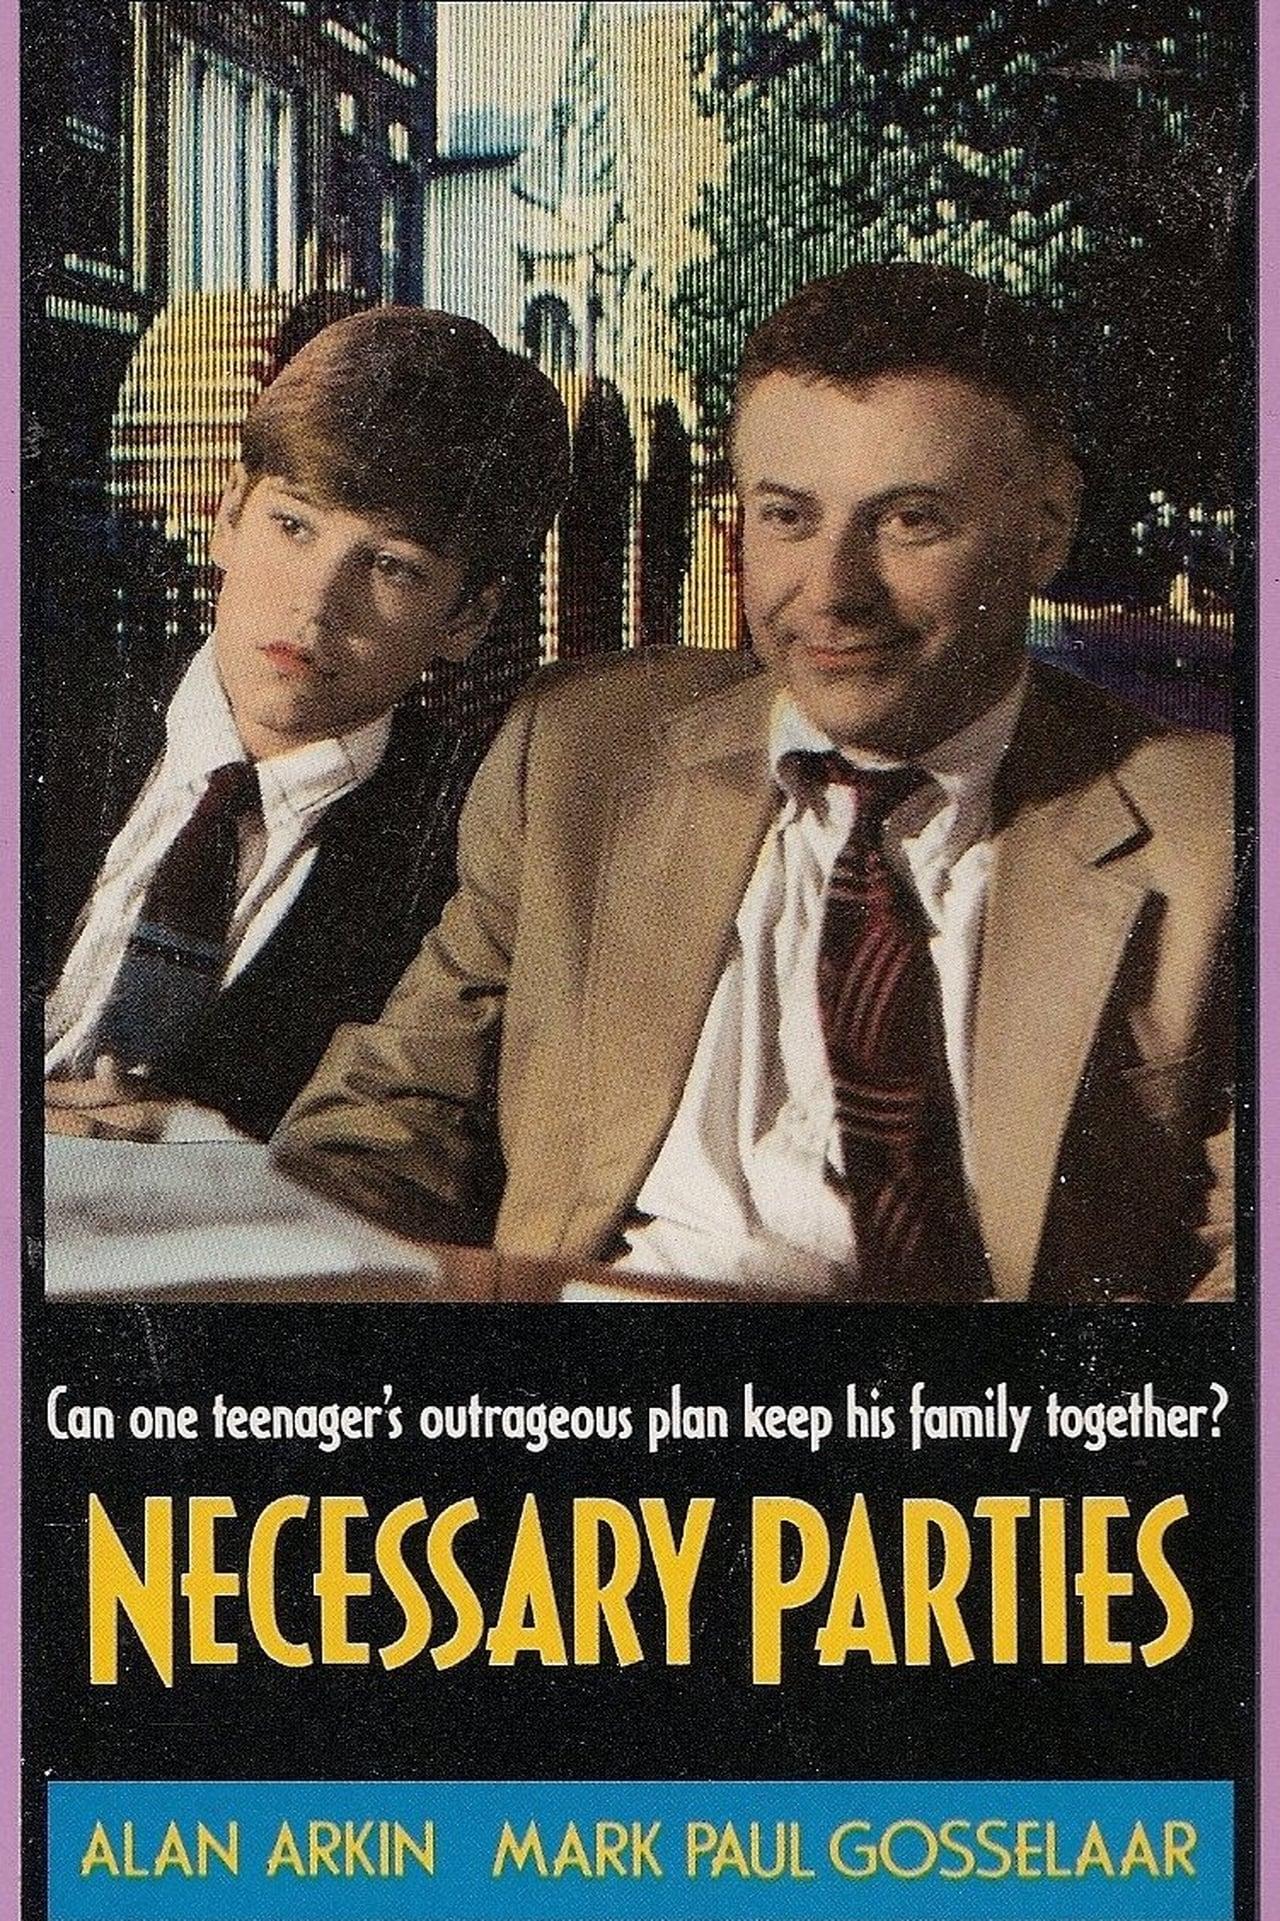 Necessary Parties poster